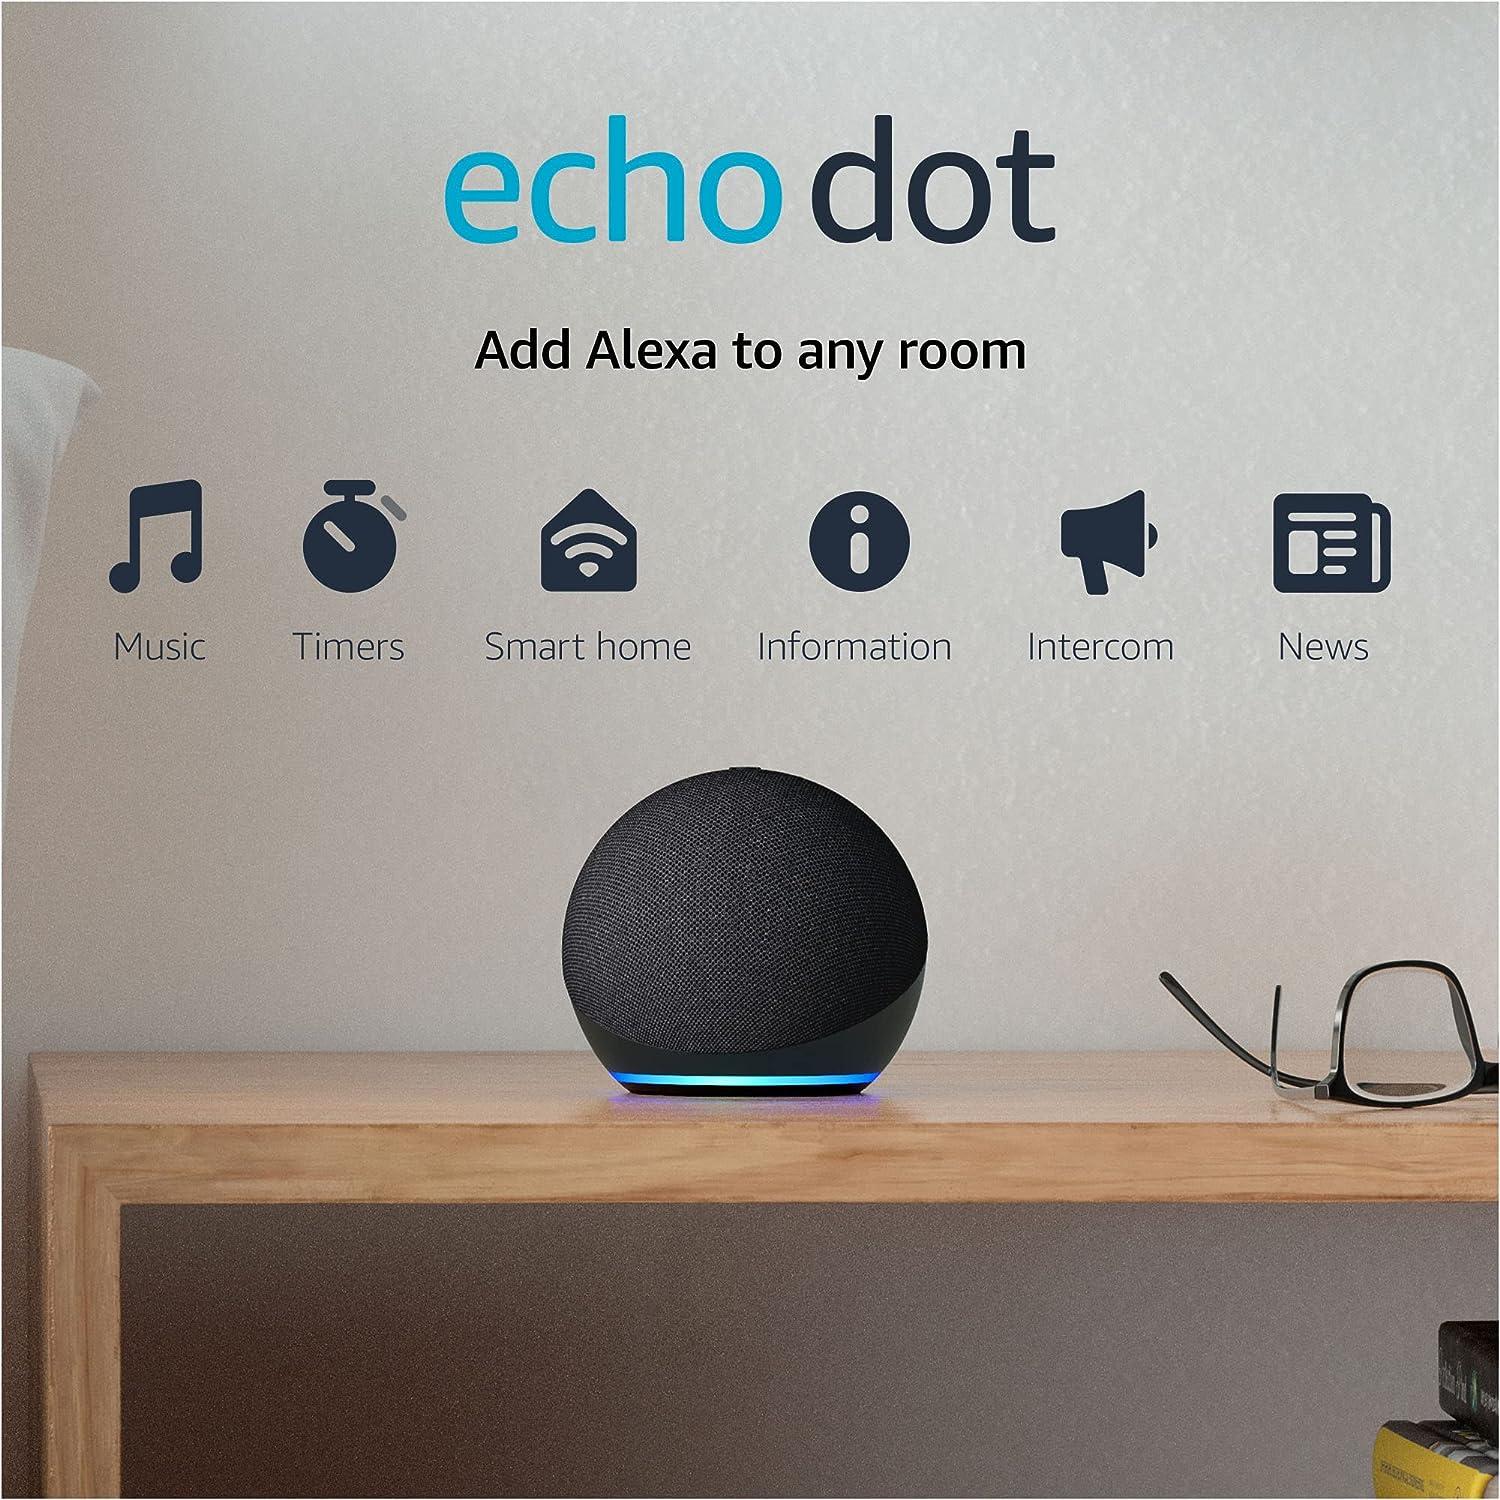 Echo Dot (4th Gen, 2020 release) | Smart Speaker with Alexa | Charcoal – A Powerful and Versatile Smart Assistant